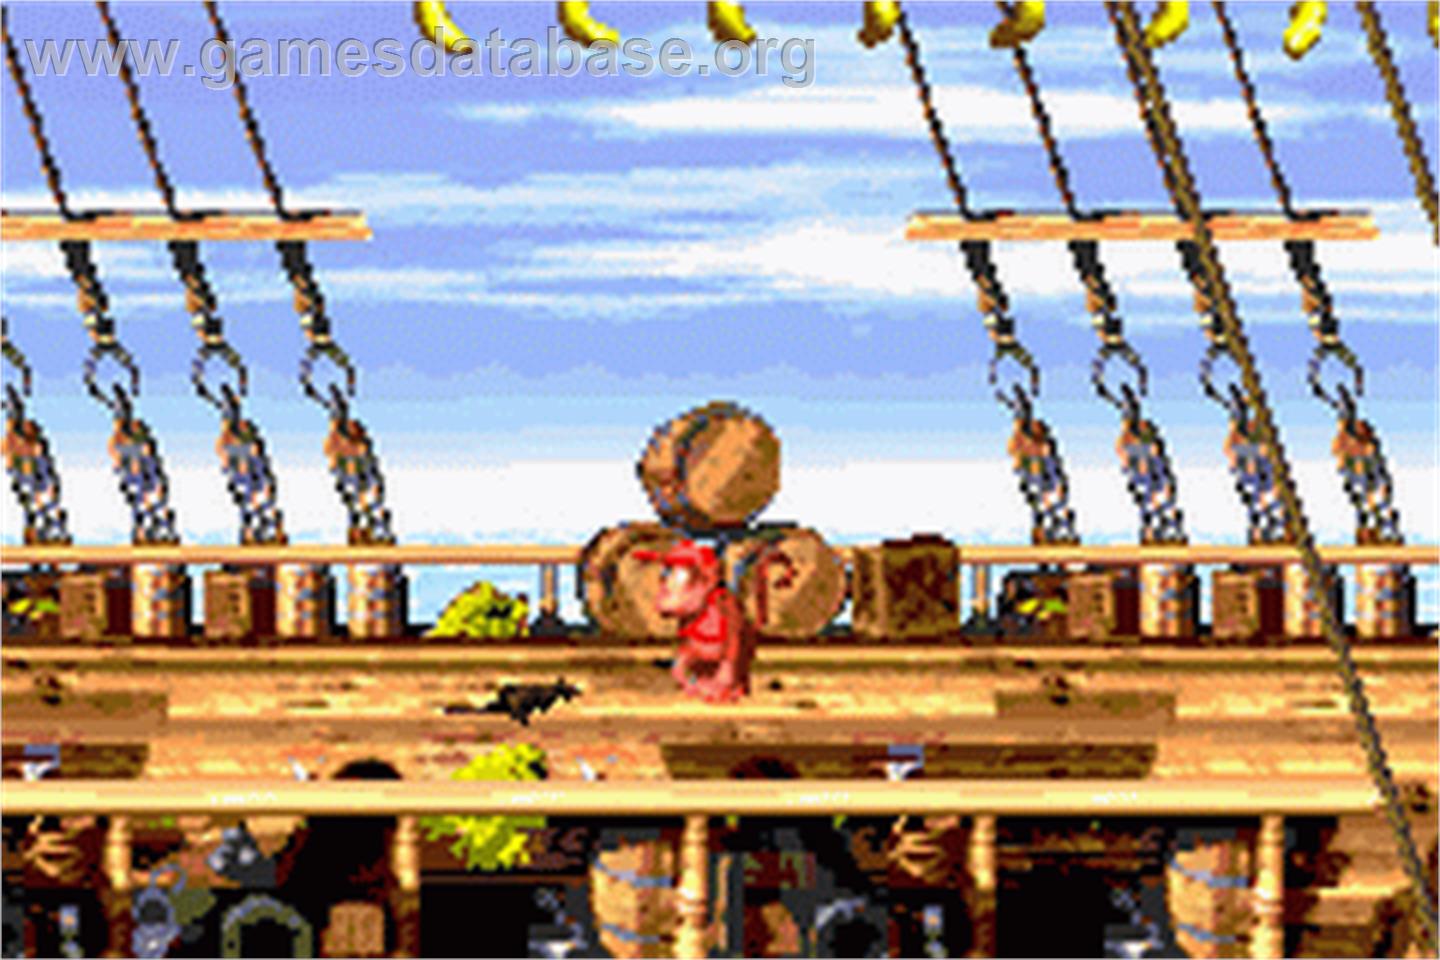 Donkey Kong Country 2: Diddy's Kong Quest - Nintendo Game Boy Advance - Artwork - In Game